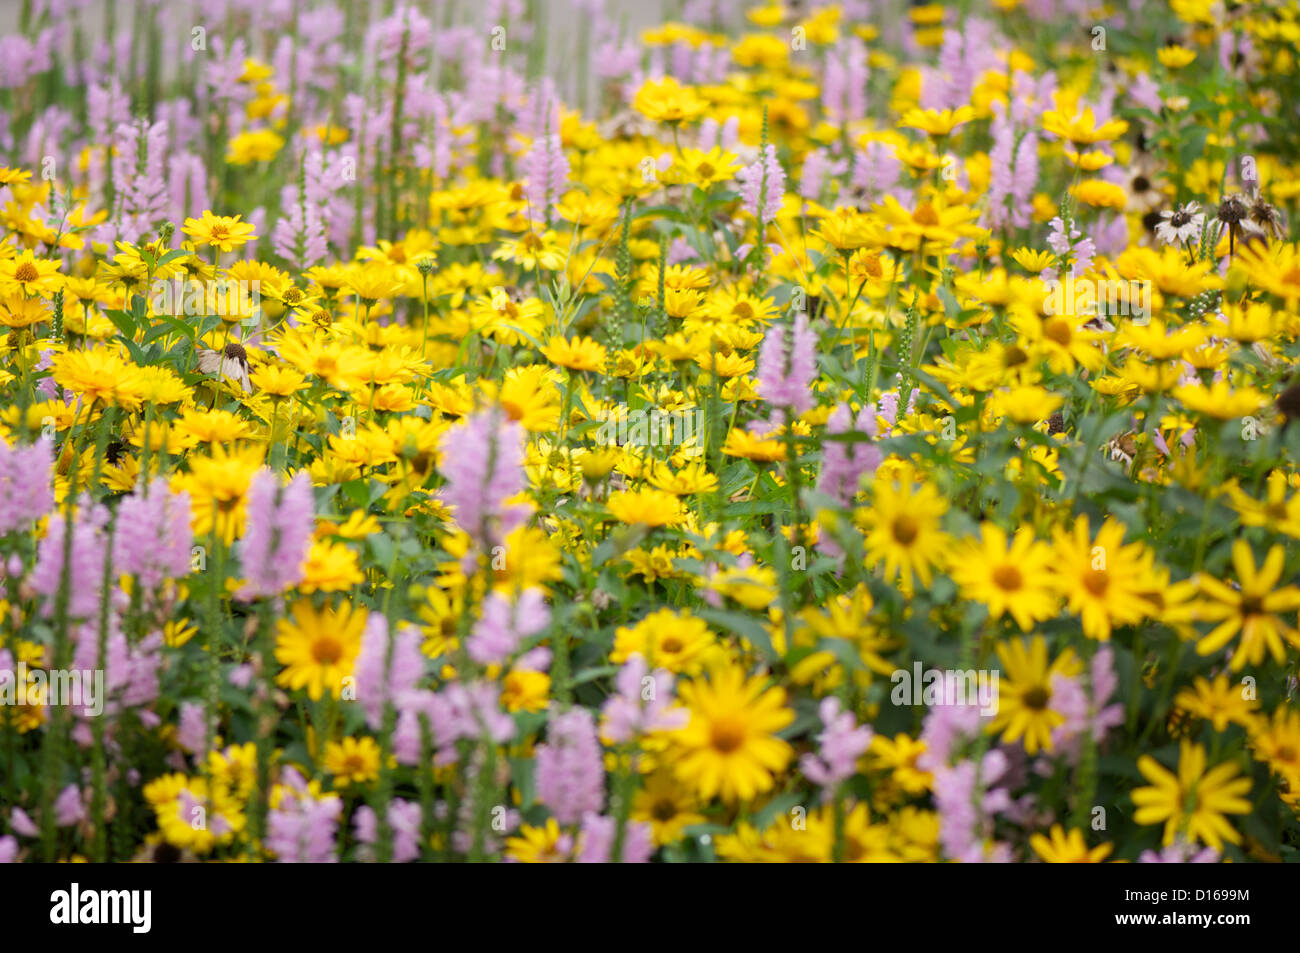 Flowers bed with various daisy, digitalis, and other autumn flowers, beautiful and colorful.  Stock Photo